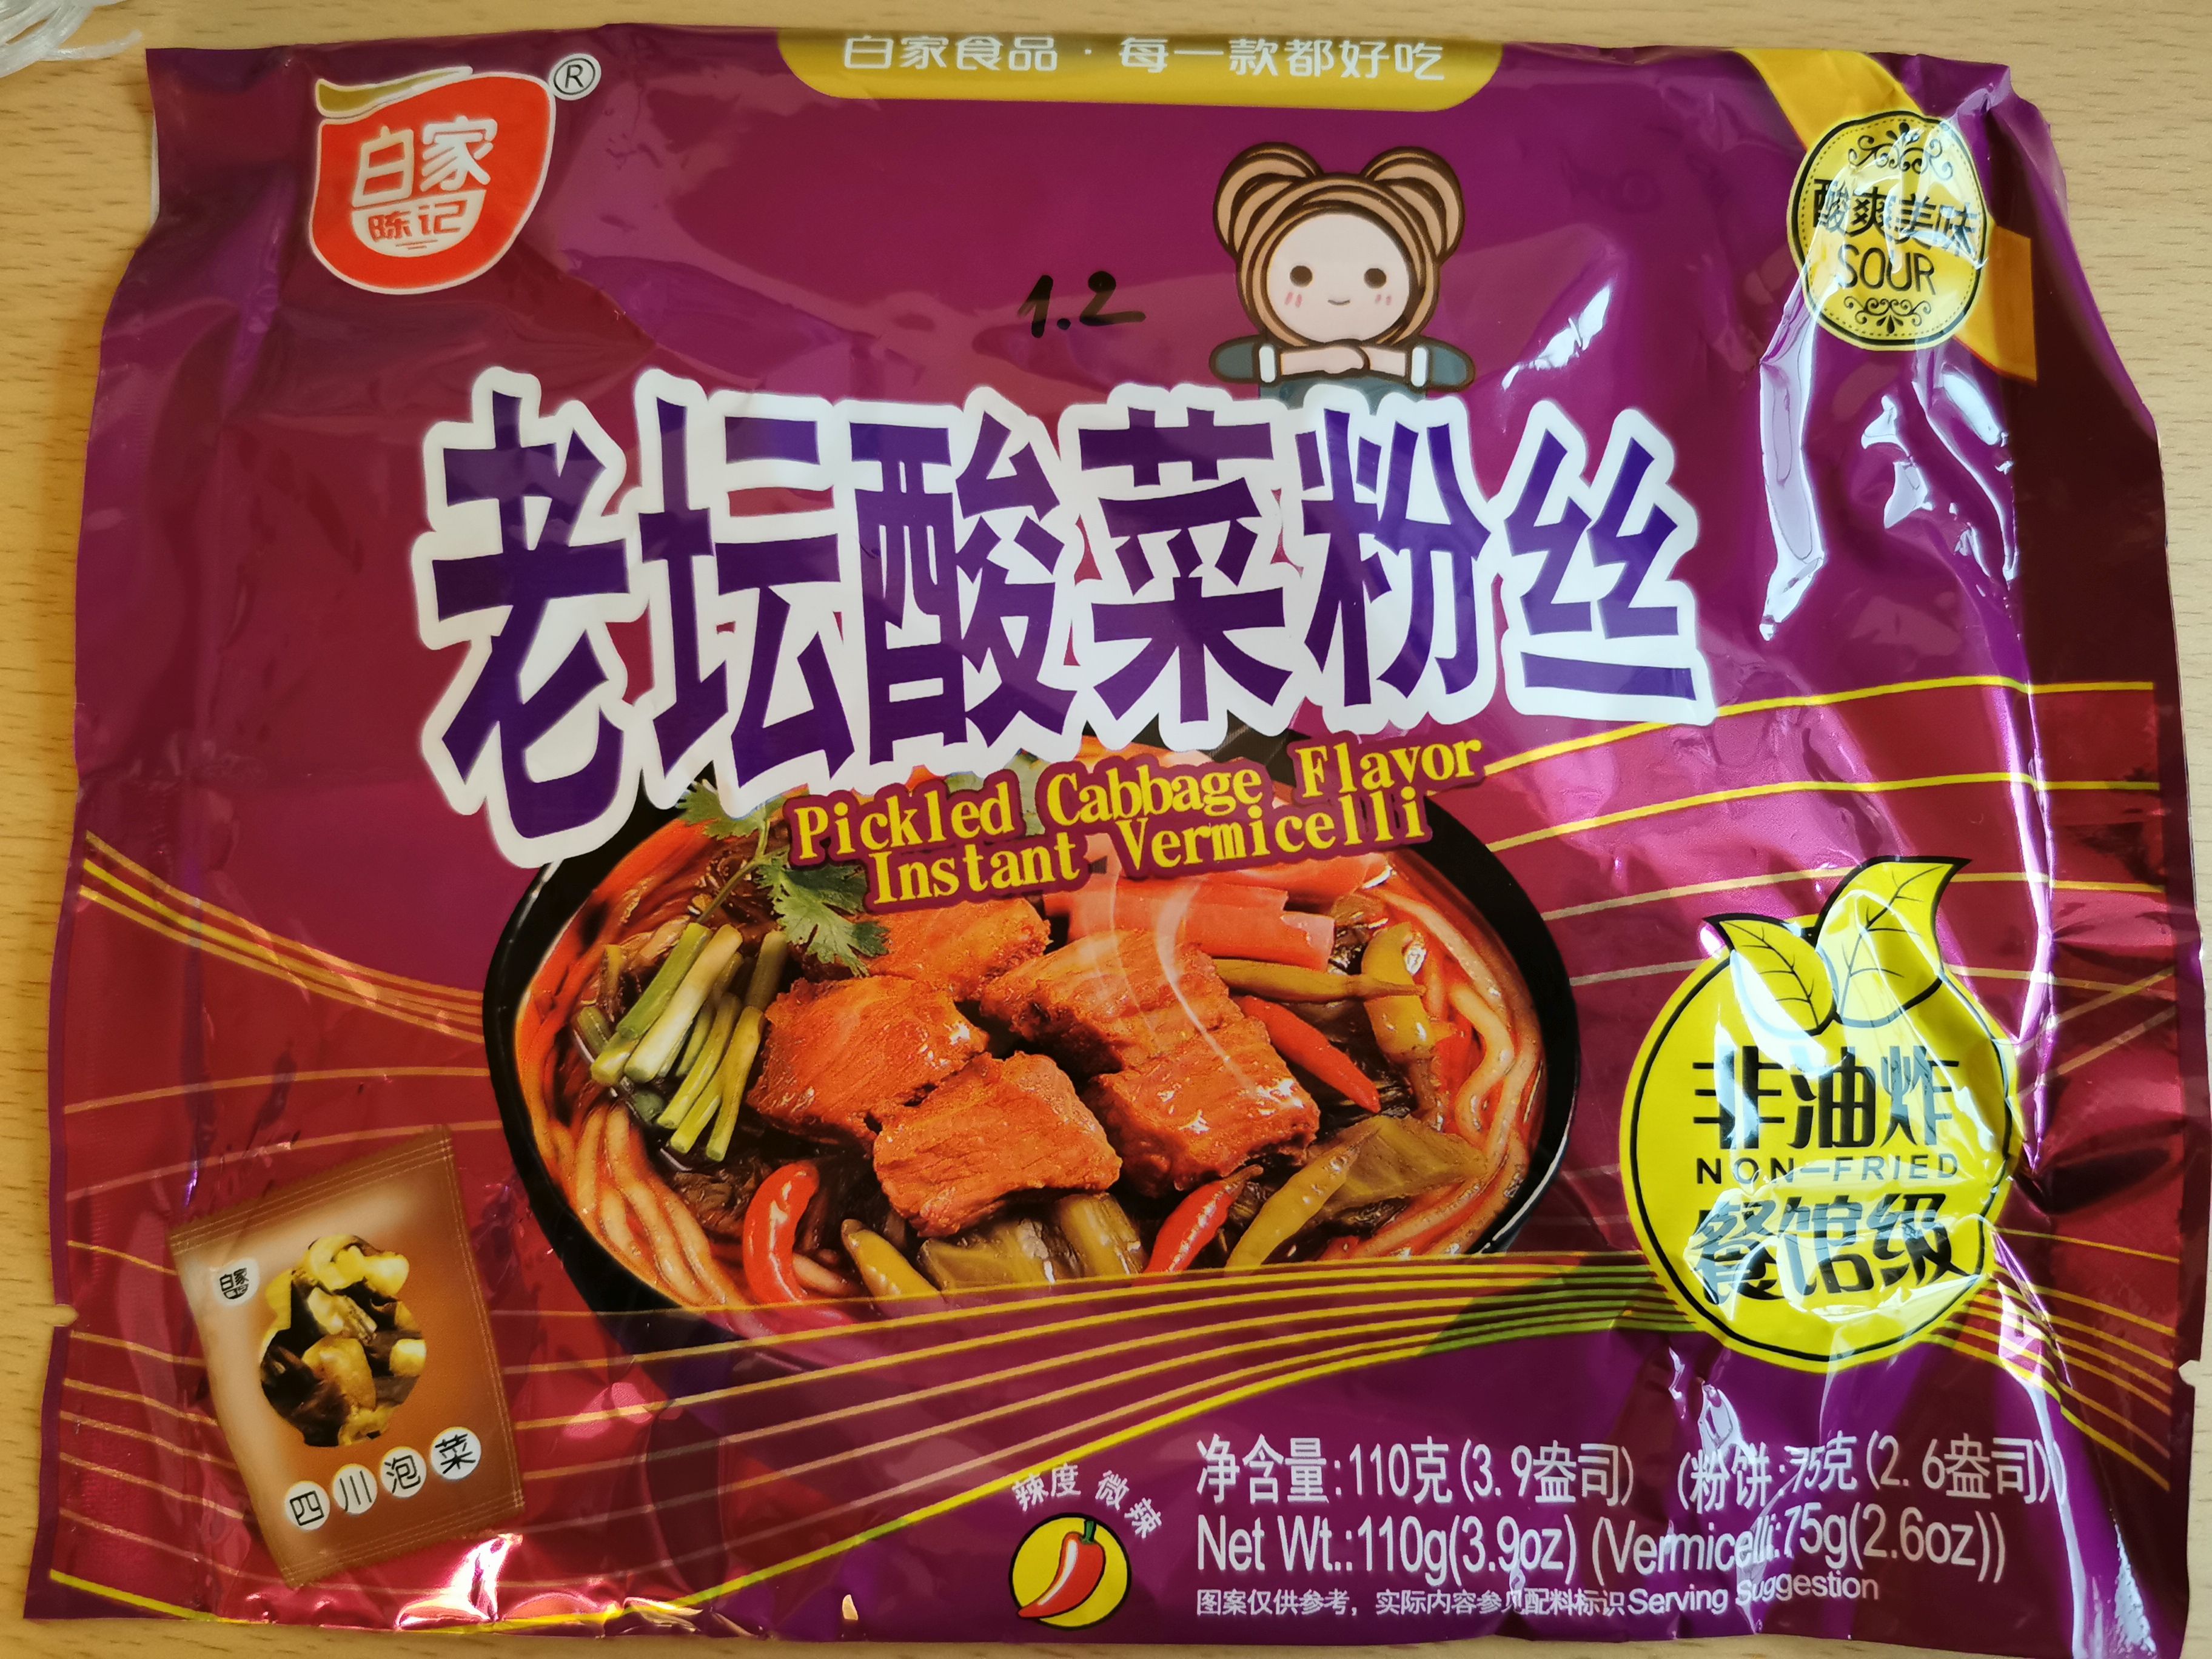 #1248: Sichuan Baijia "Pickled Cabbage Flavor" Instant Vermicelli  (Update 2021)